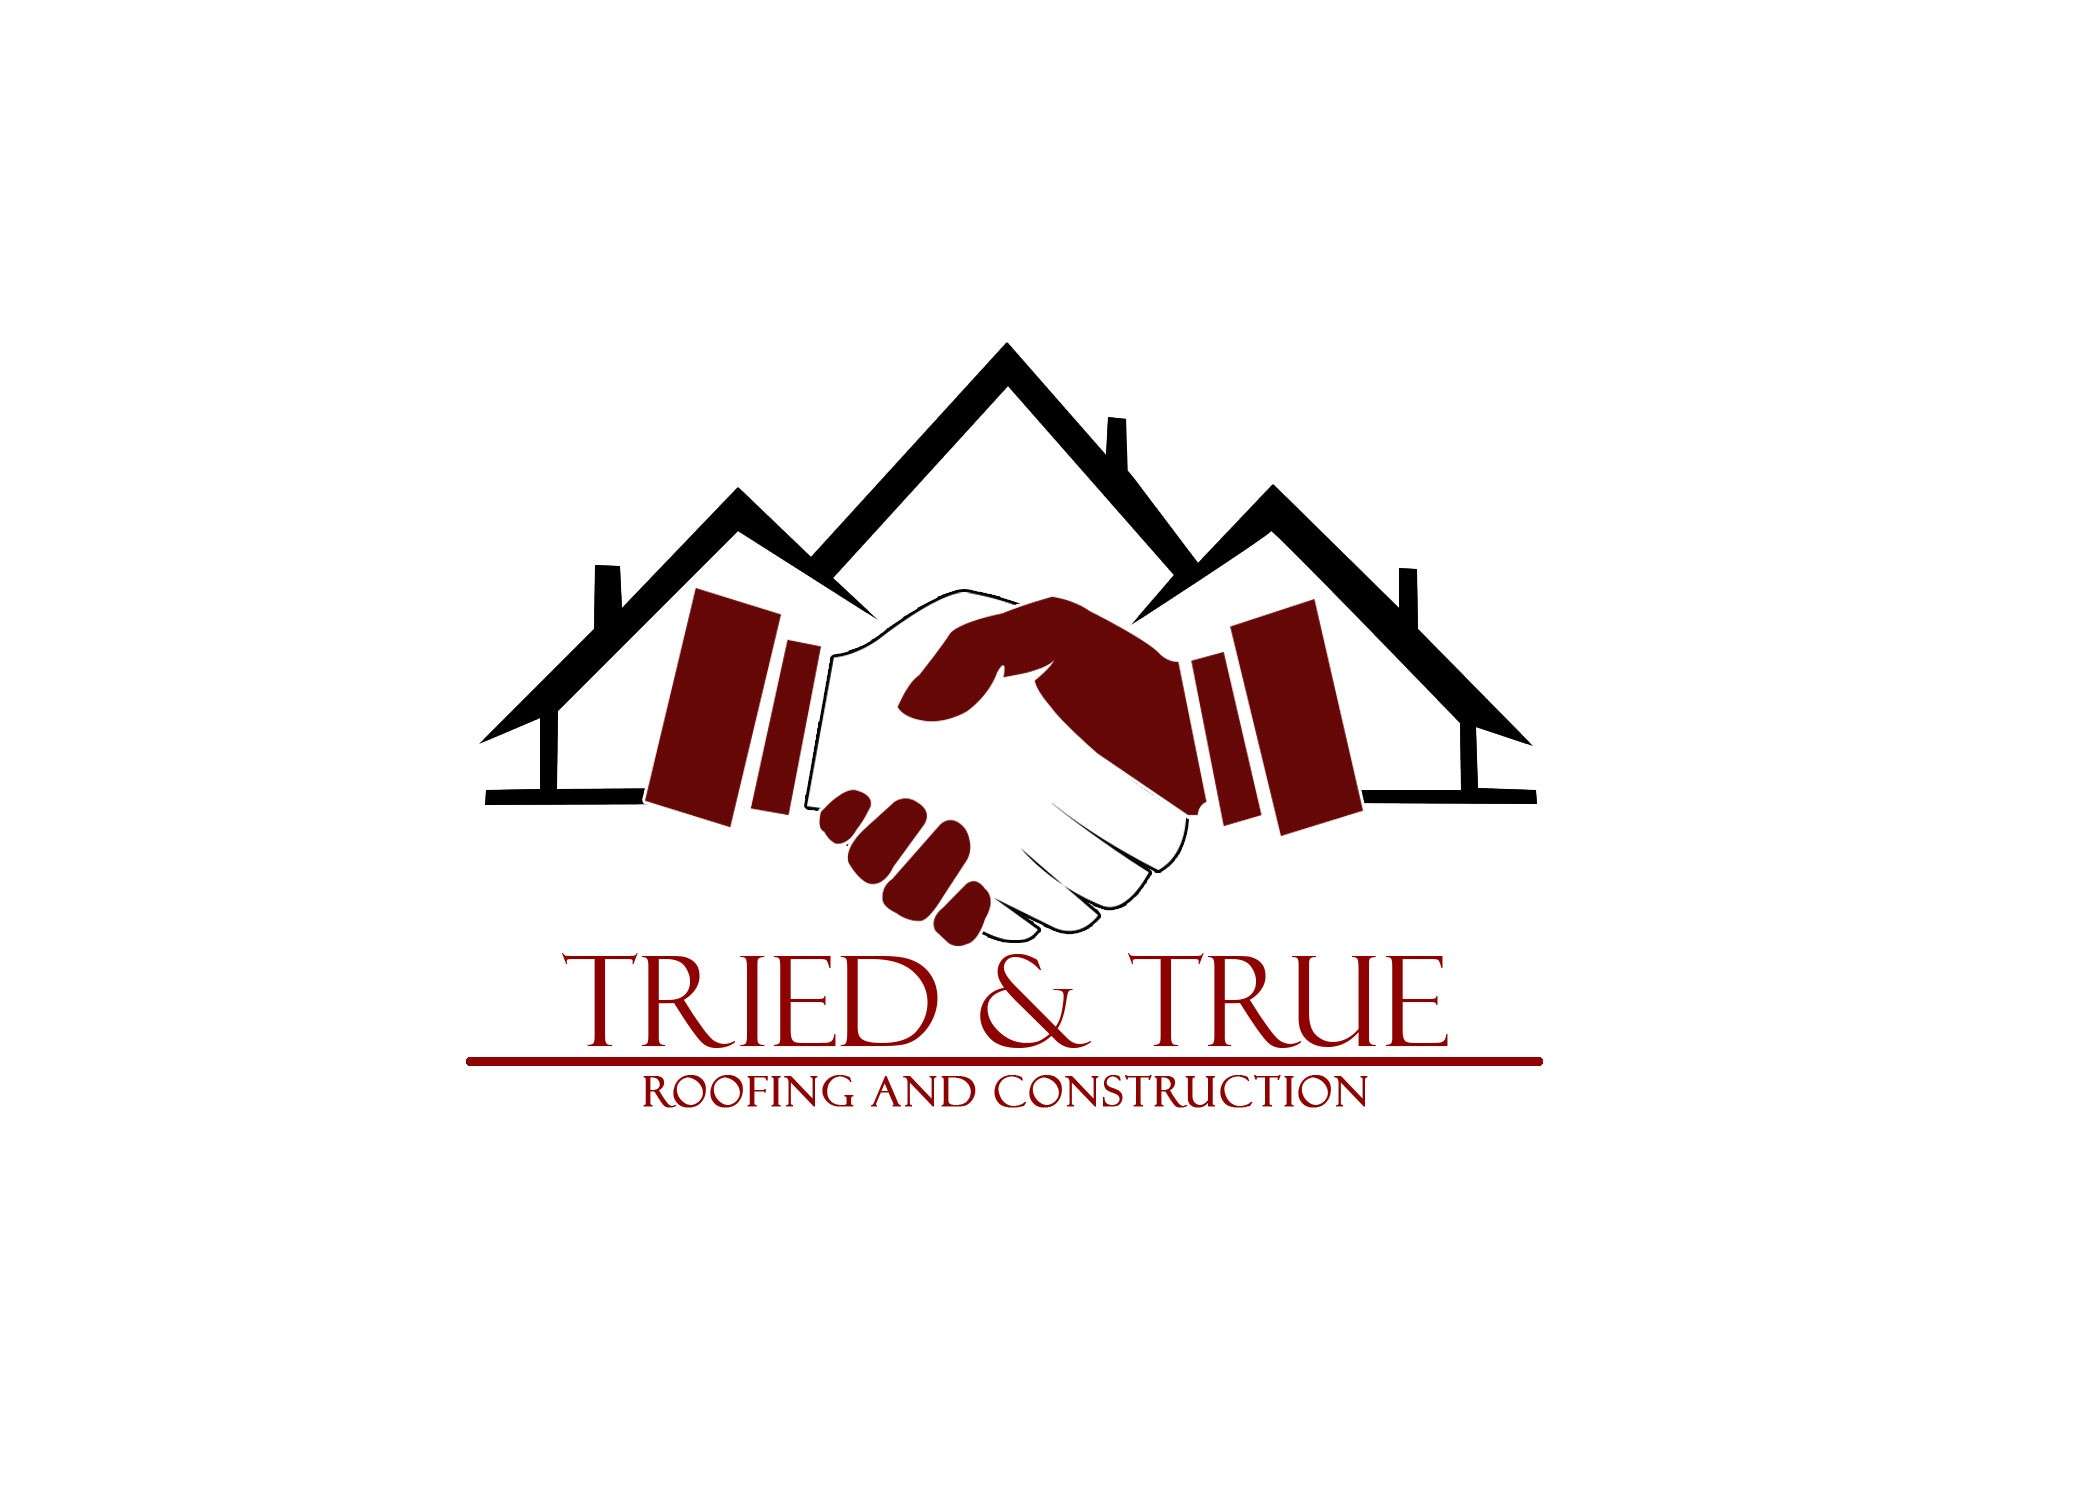 Tried & True Roofing and Construction Logo